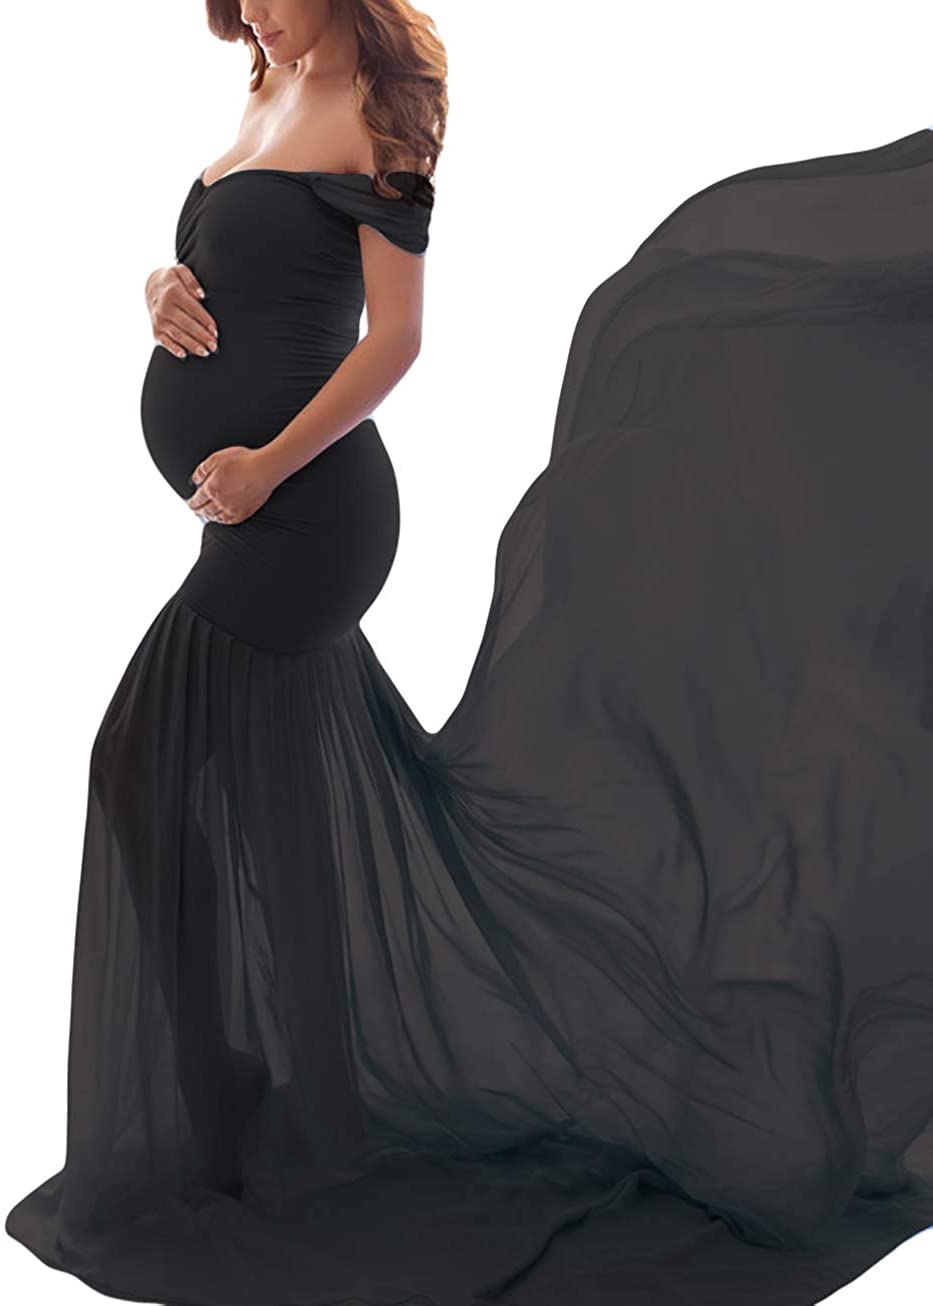 JustVH Maternity Chiffon Off Shoulder Gown Front Split Maxi Photoshoot Photography Dress